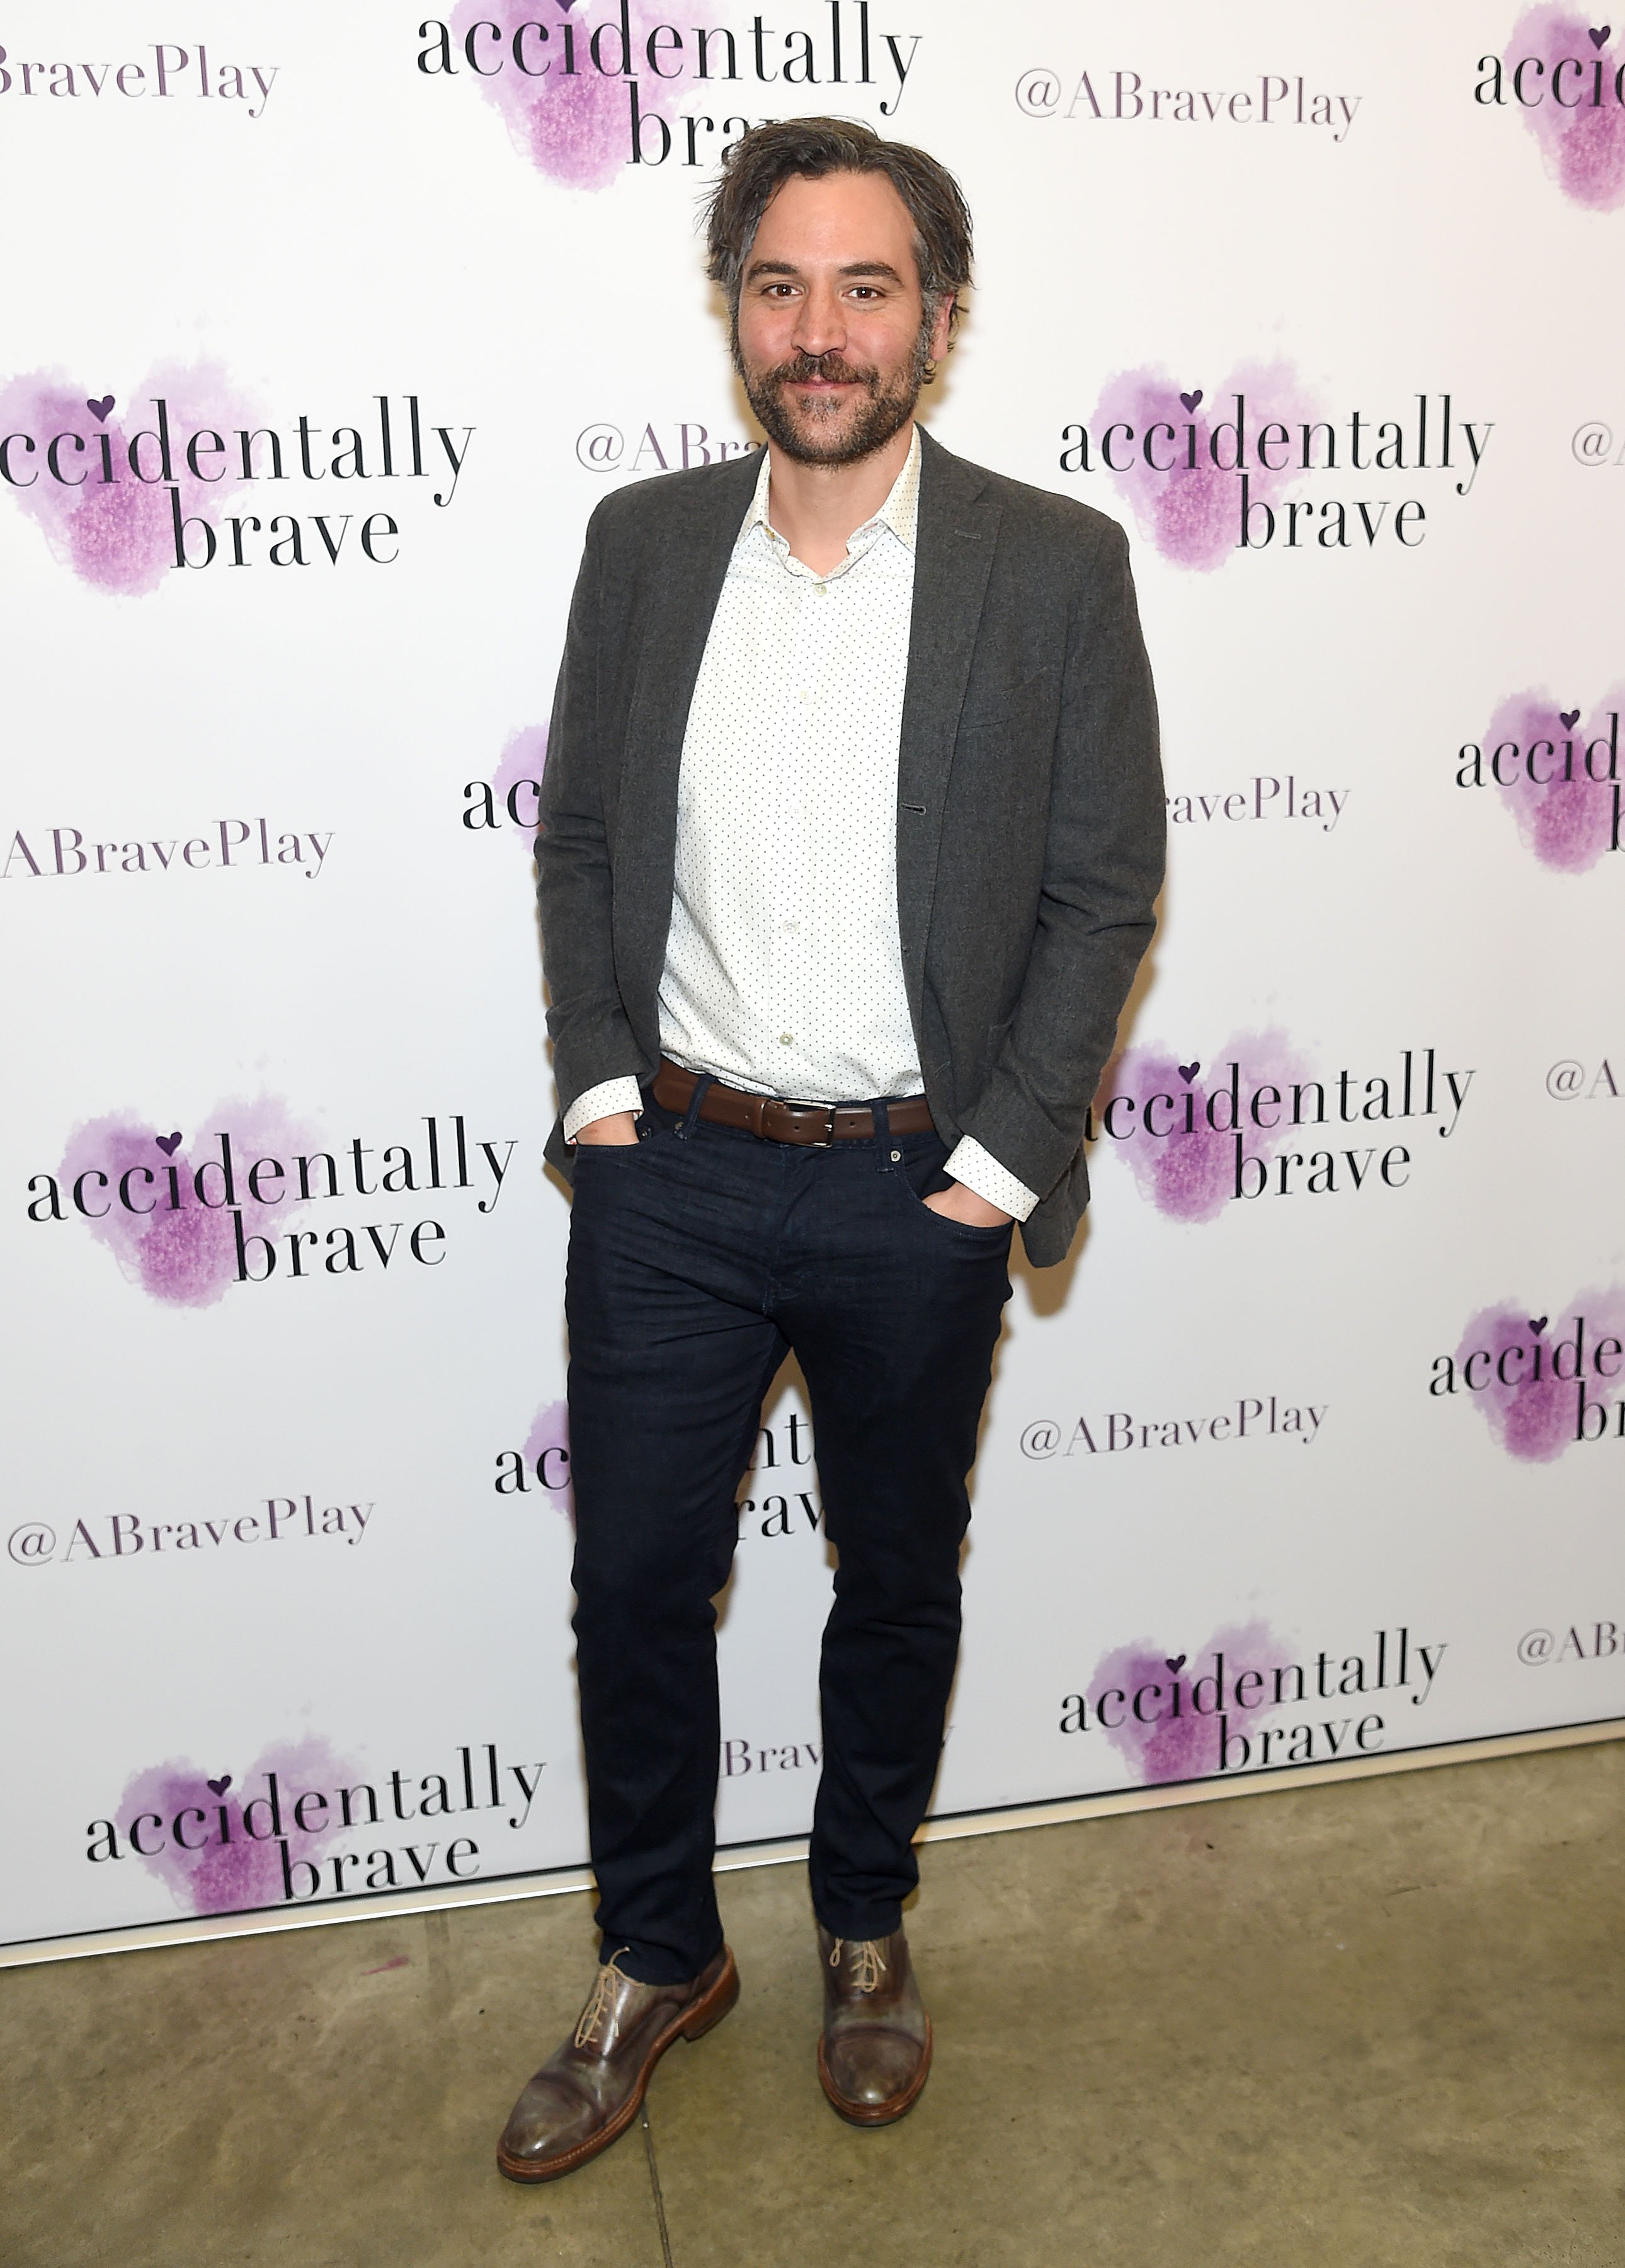 Josh Radnor at the "Accidentally Brave" Opening Night on March 25, 2019, in New York City. | Source: Getty Images